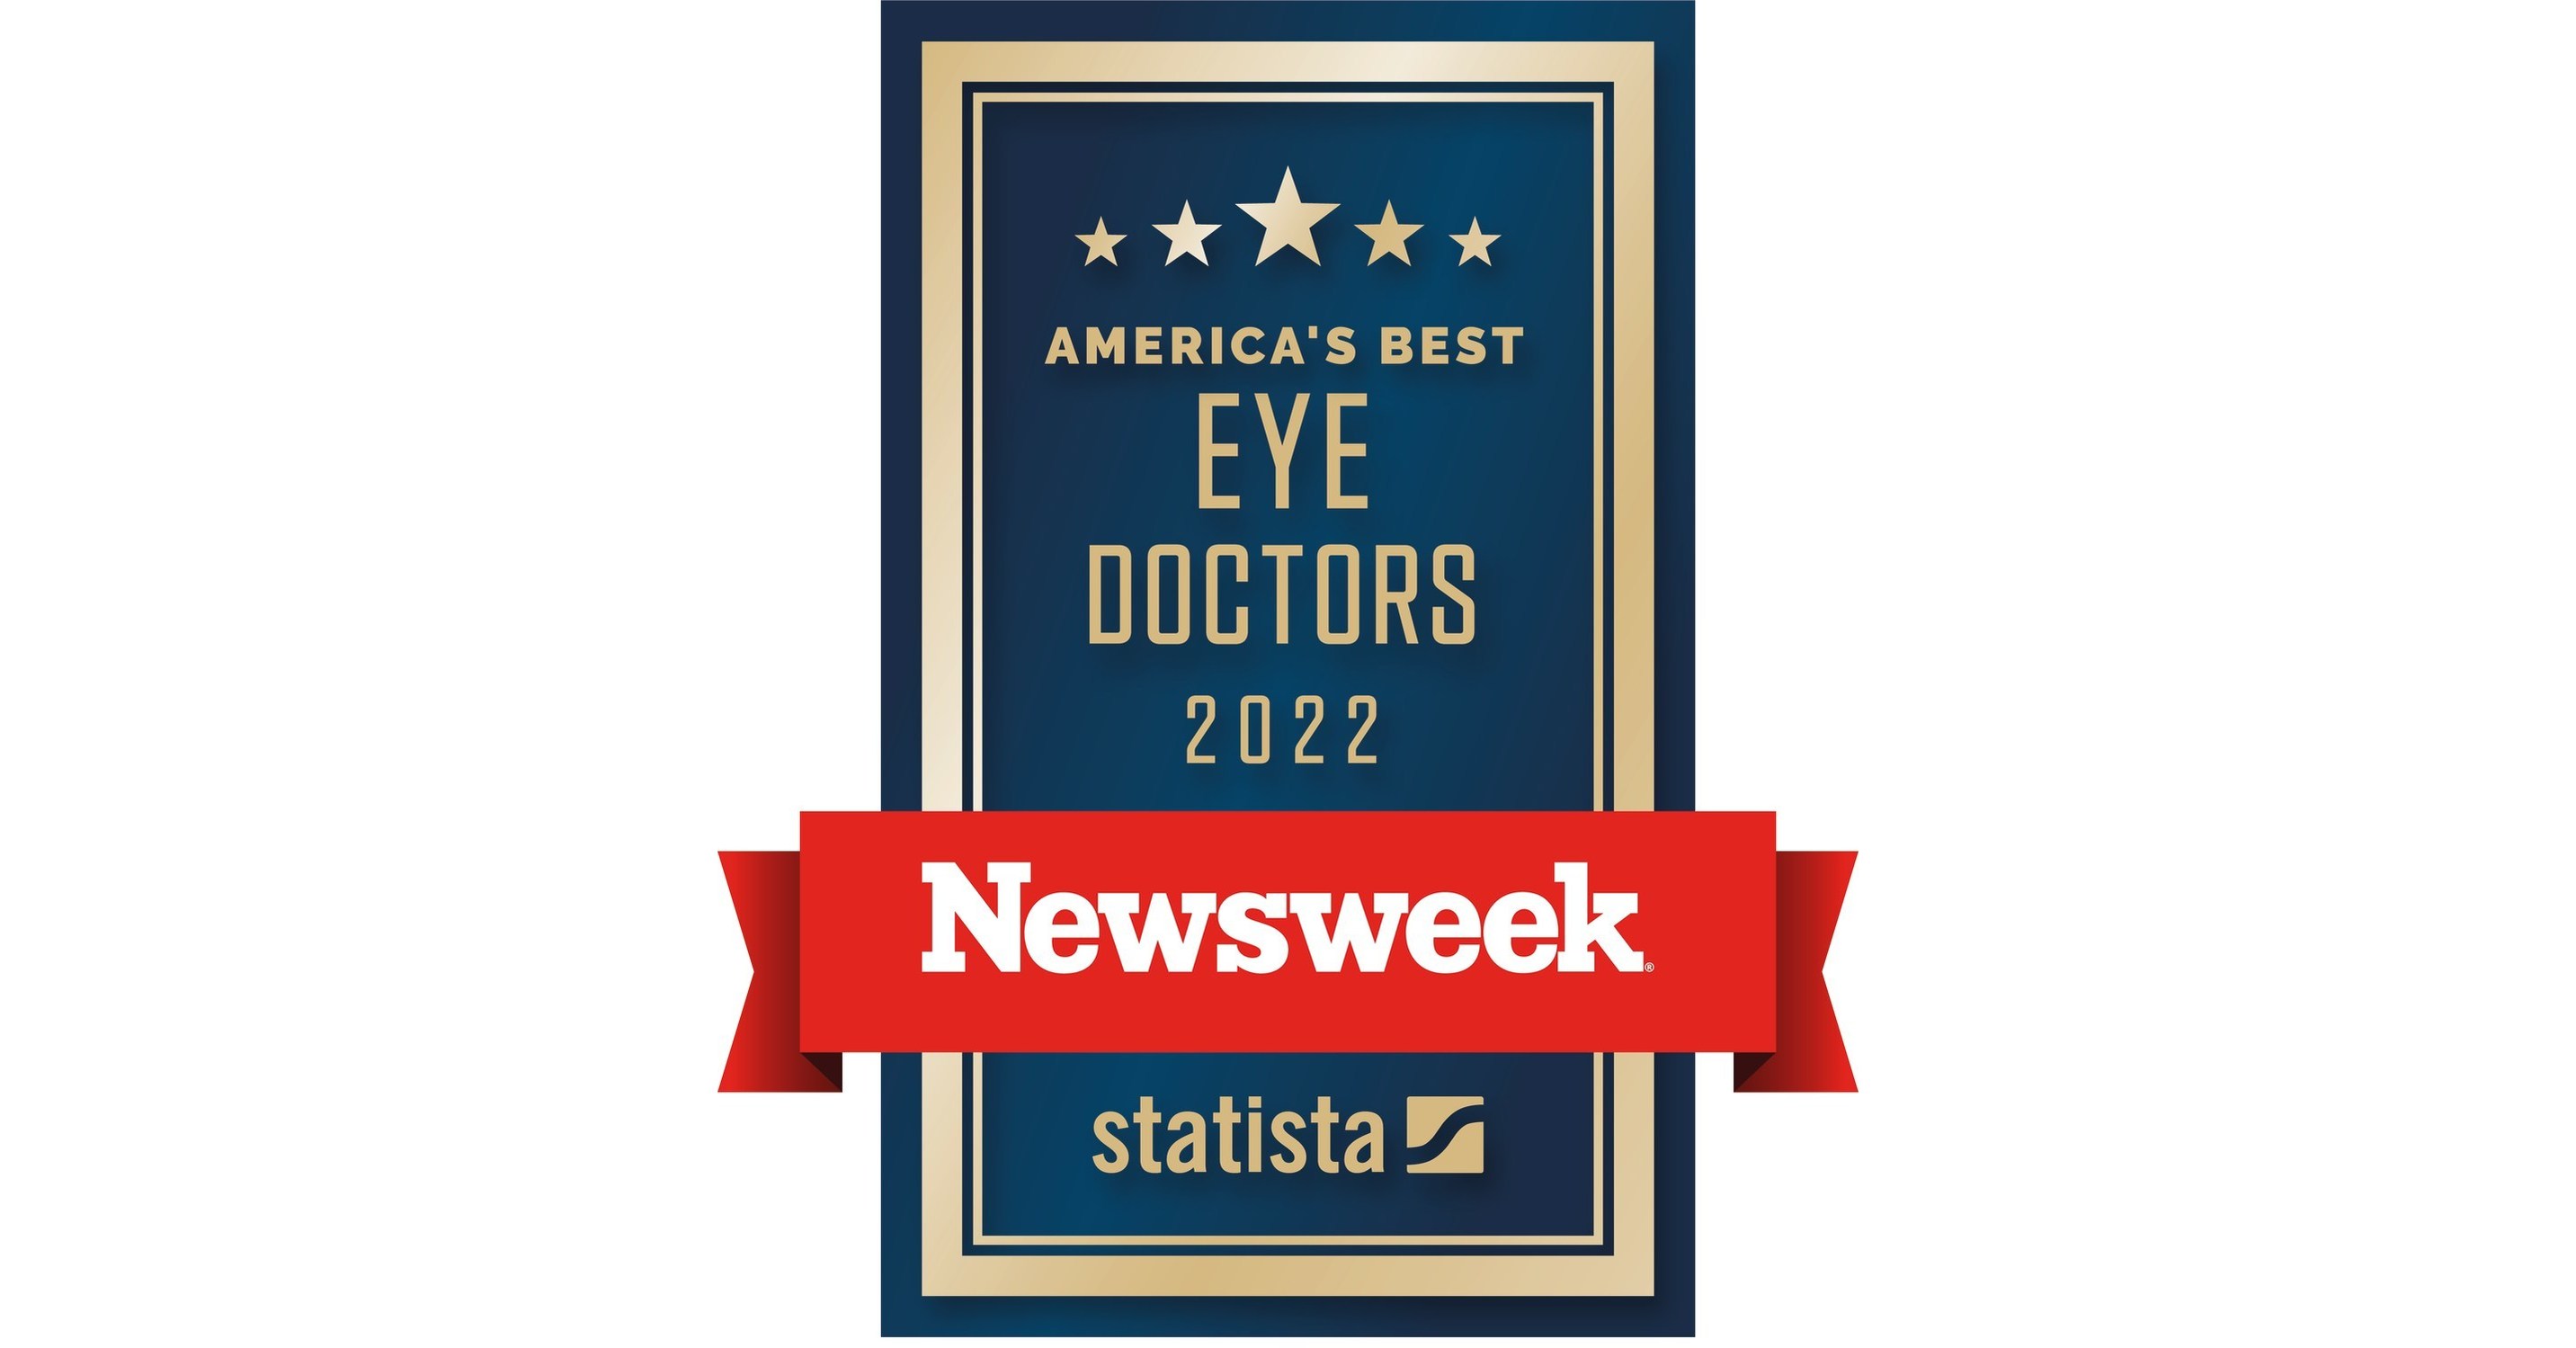 Vitreous Retina Macula Consultants of New York Ophthalmologists Awarded